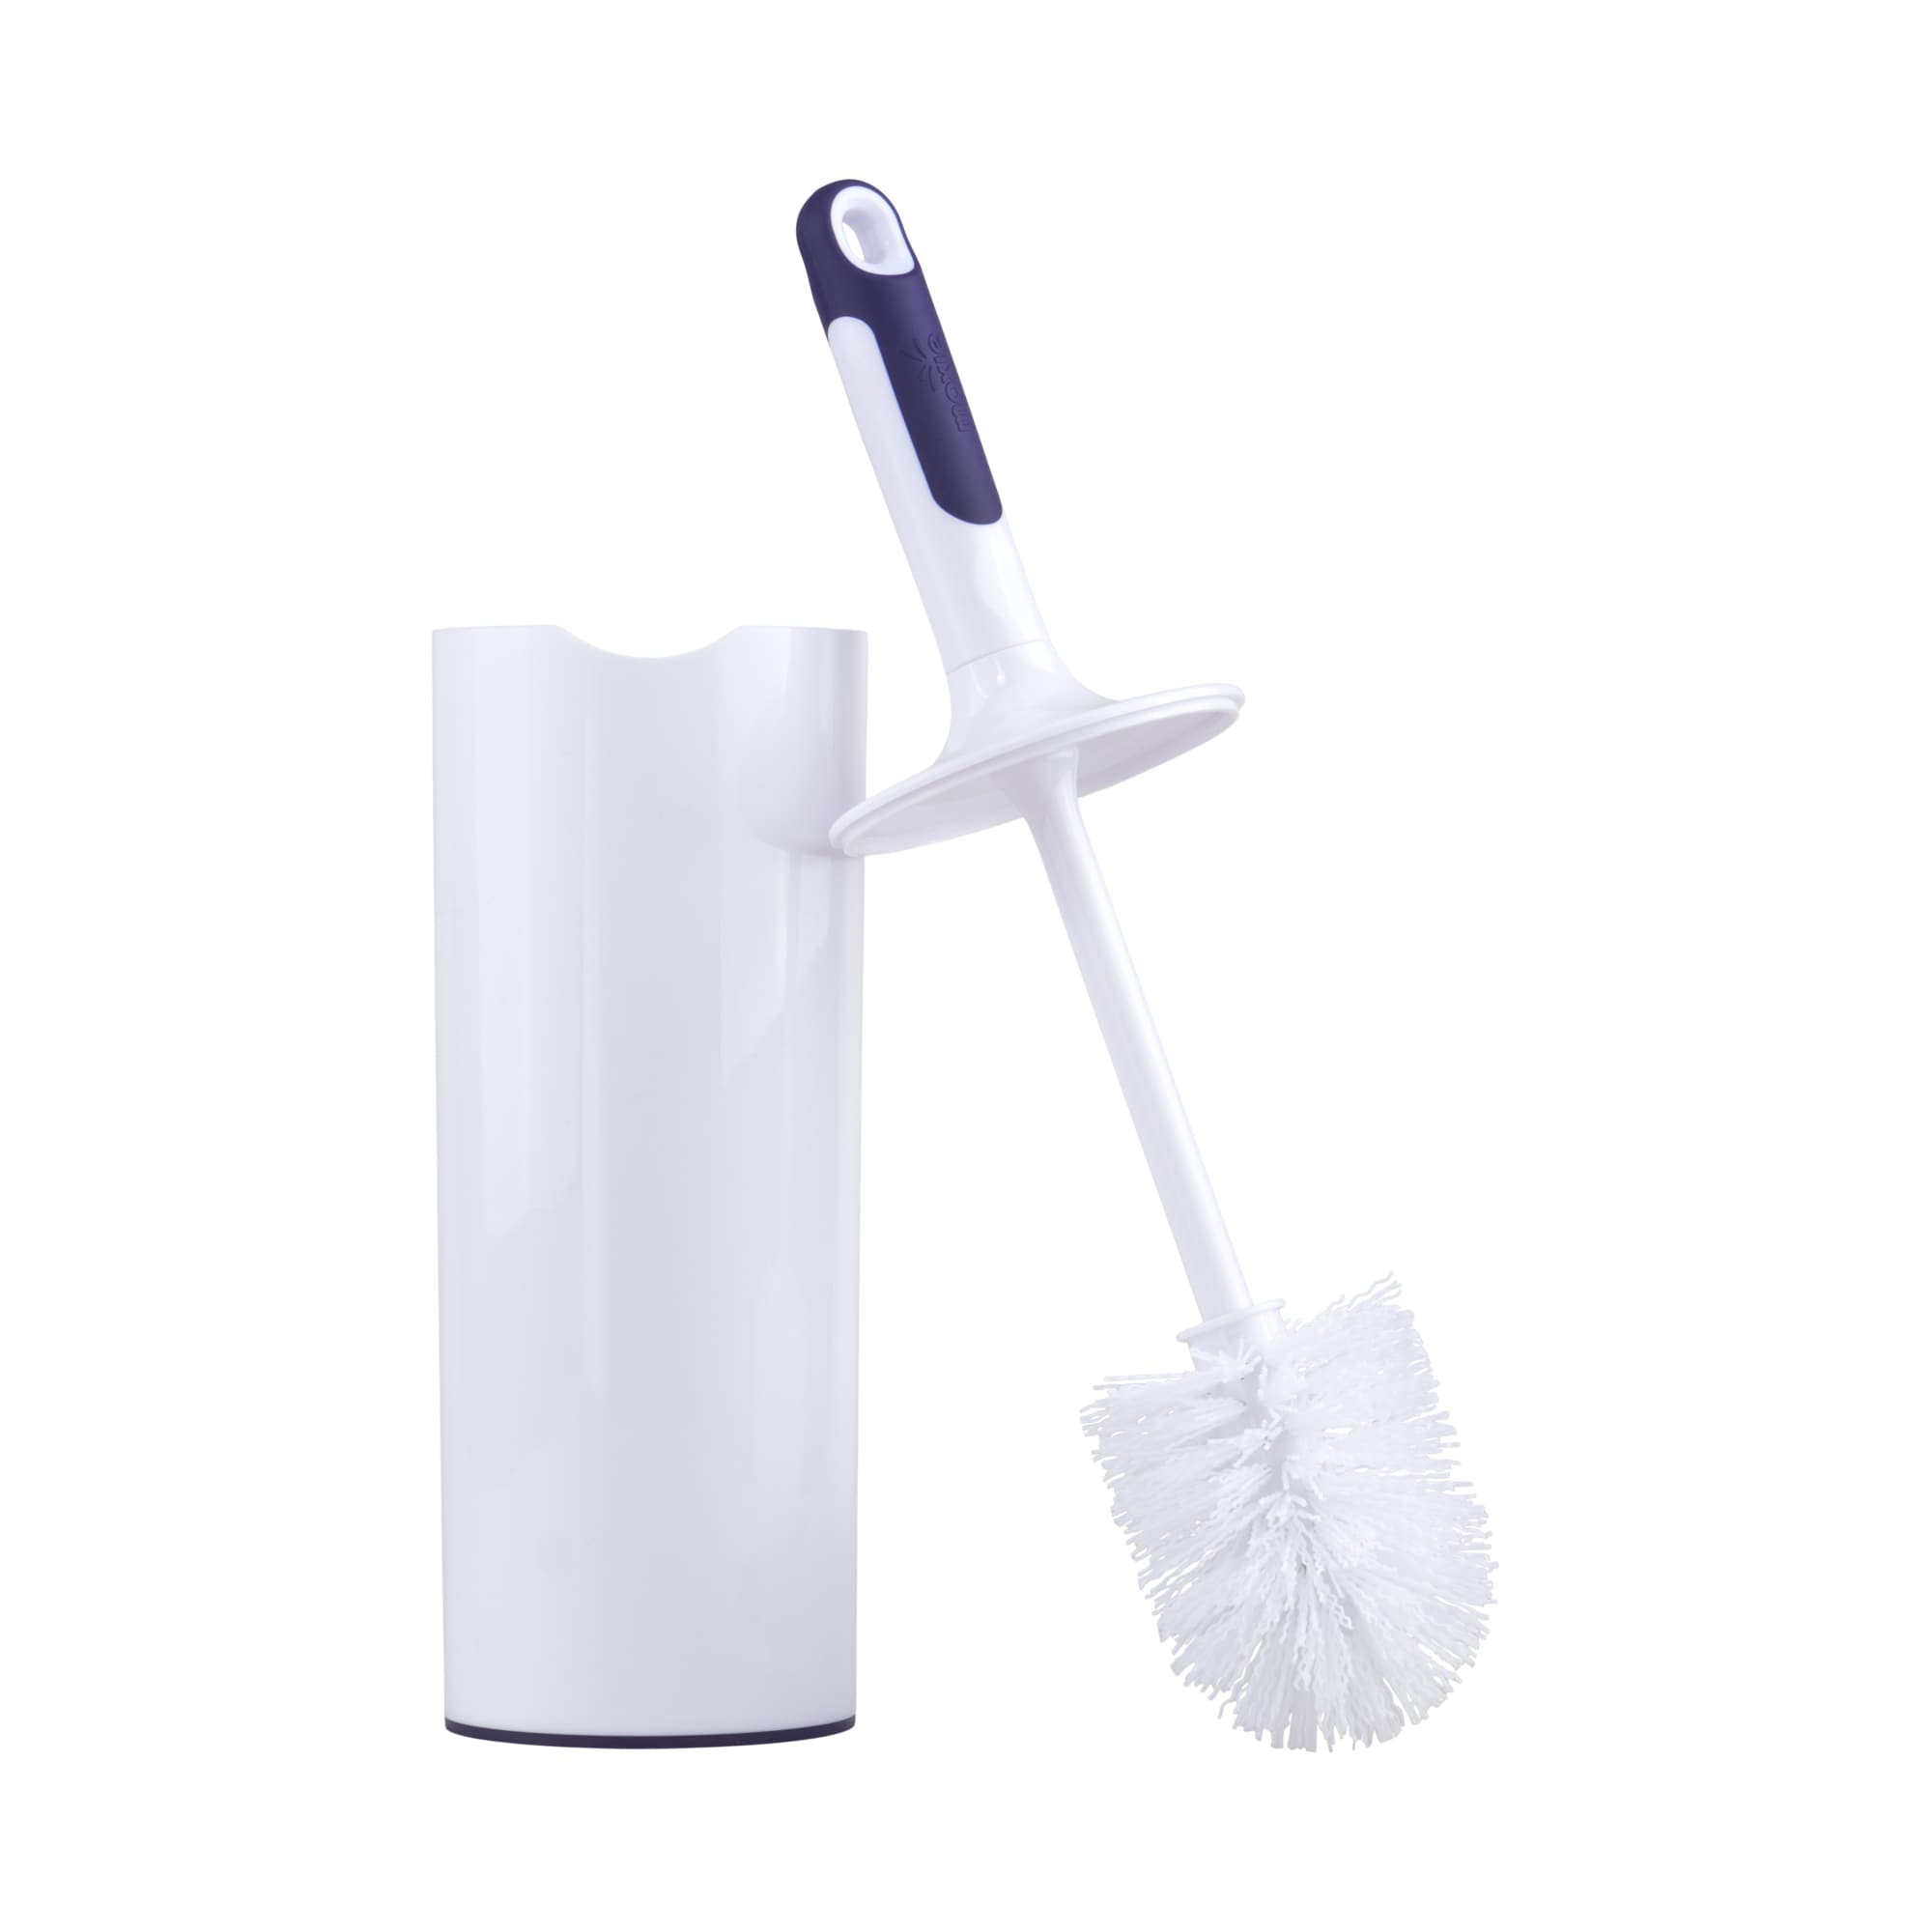 WHITEIBIS HOME CLEANING SET Cleaning Brush, Broom, Toilet Brush